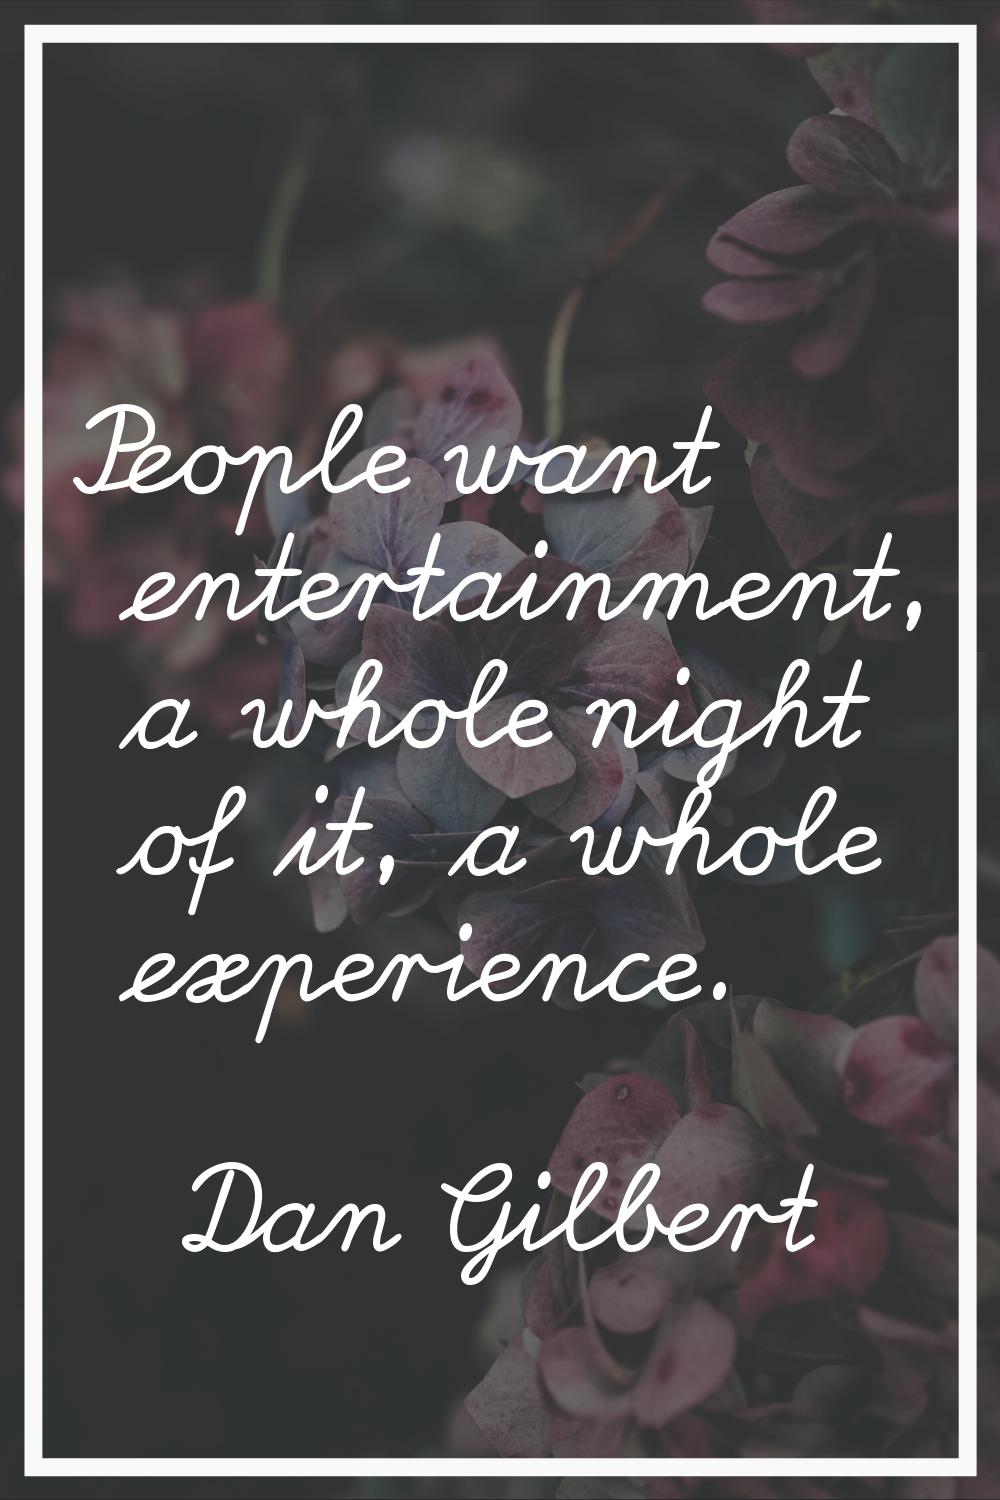 People want entertainment, a whole night of it, a whole experience.